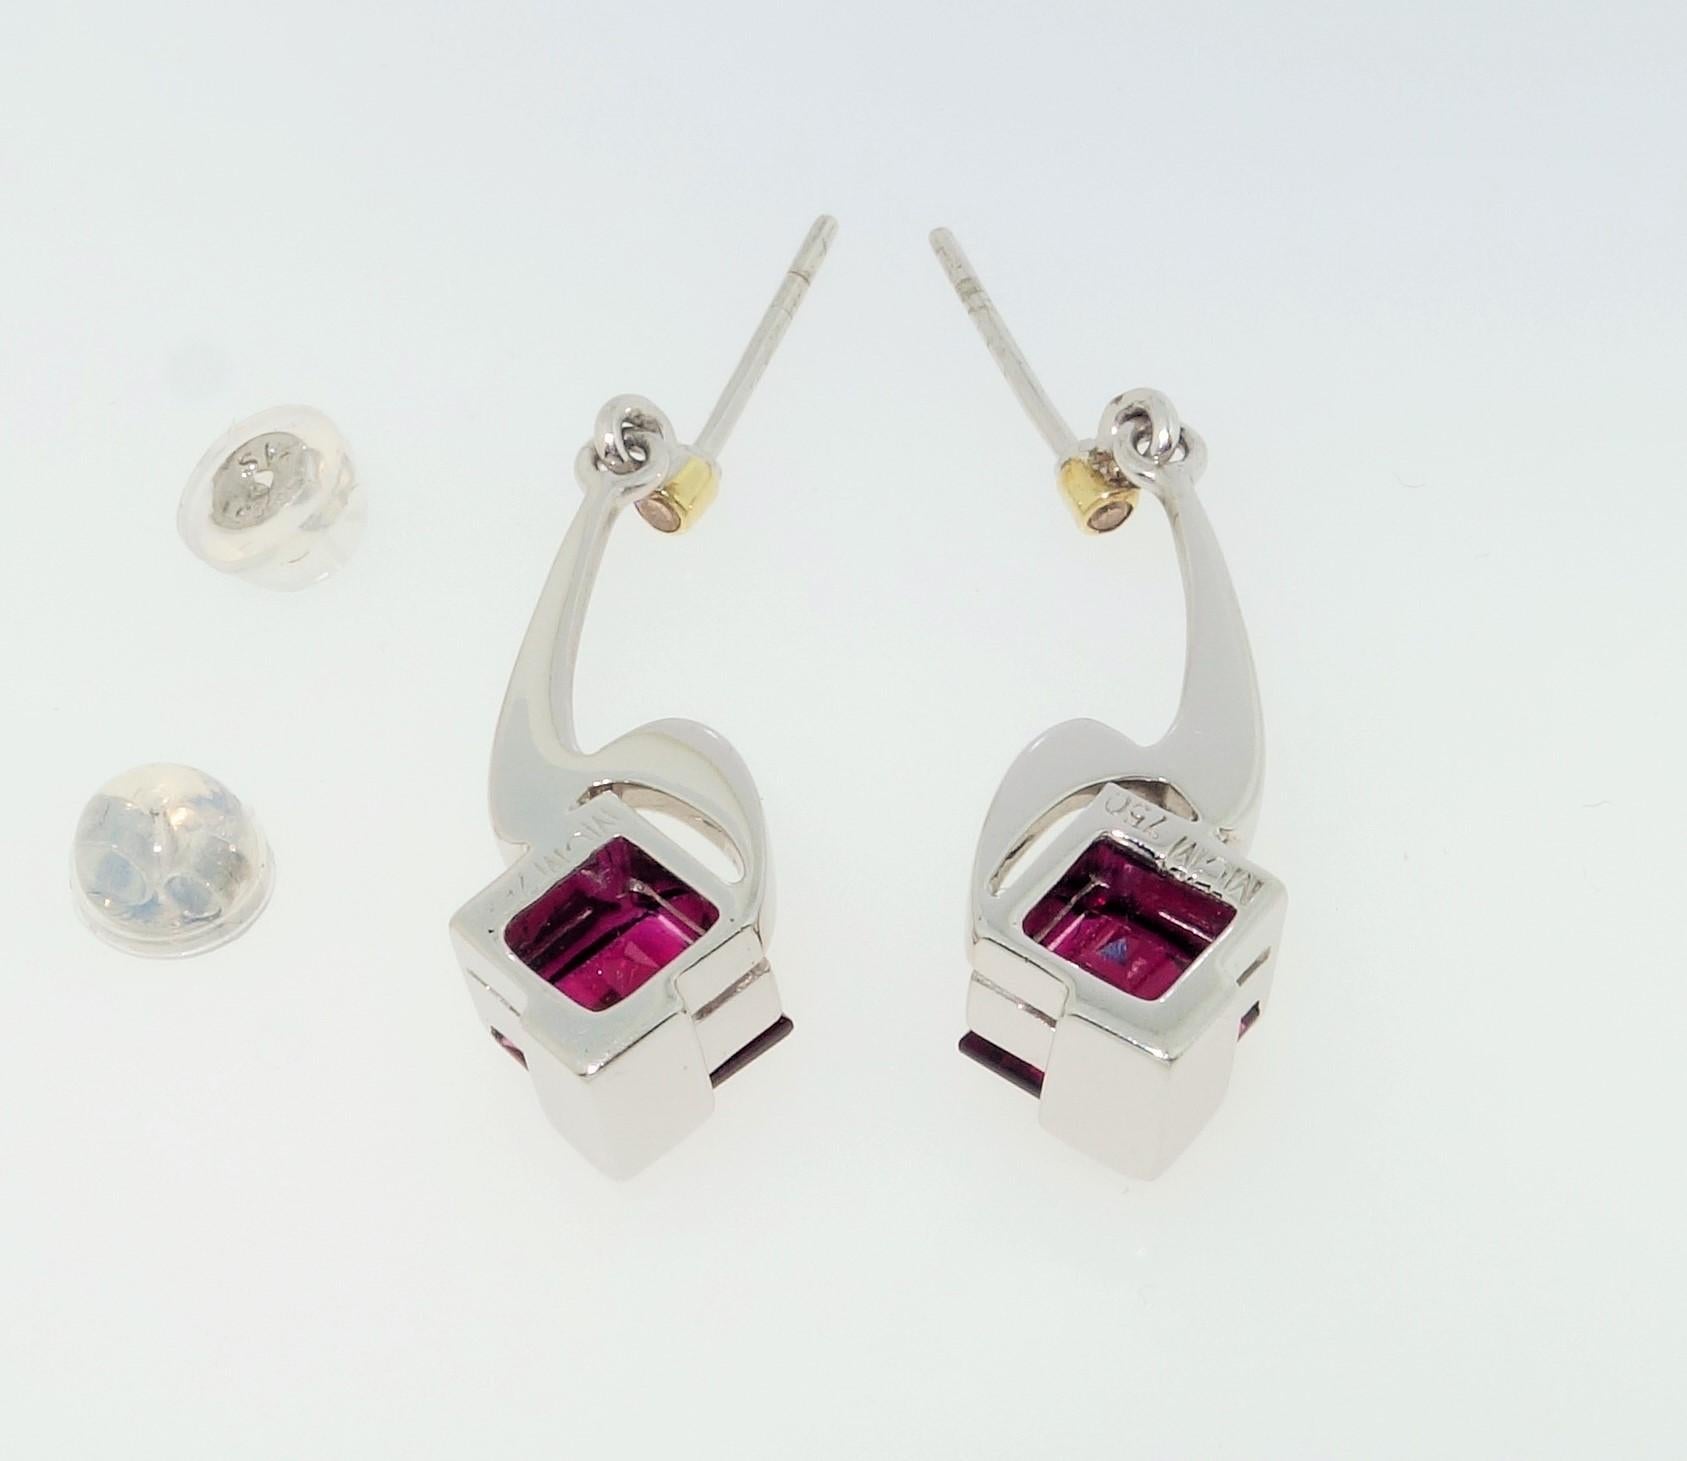 Simply Beautiful, Elegant and finely detailed Dangle Drop Earrings, securely nestled with  2.75 Carat square Rubelite Tourmaline, measuring 7mm and accented by Diamonds. Each  size: 30mm long. Hand crafted in Rhodium sterling silver and 18 Karat